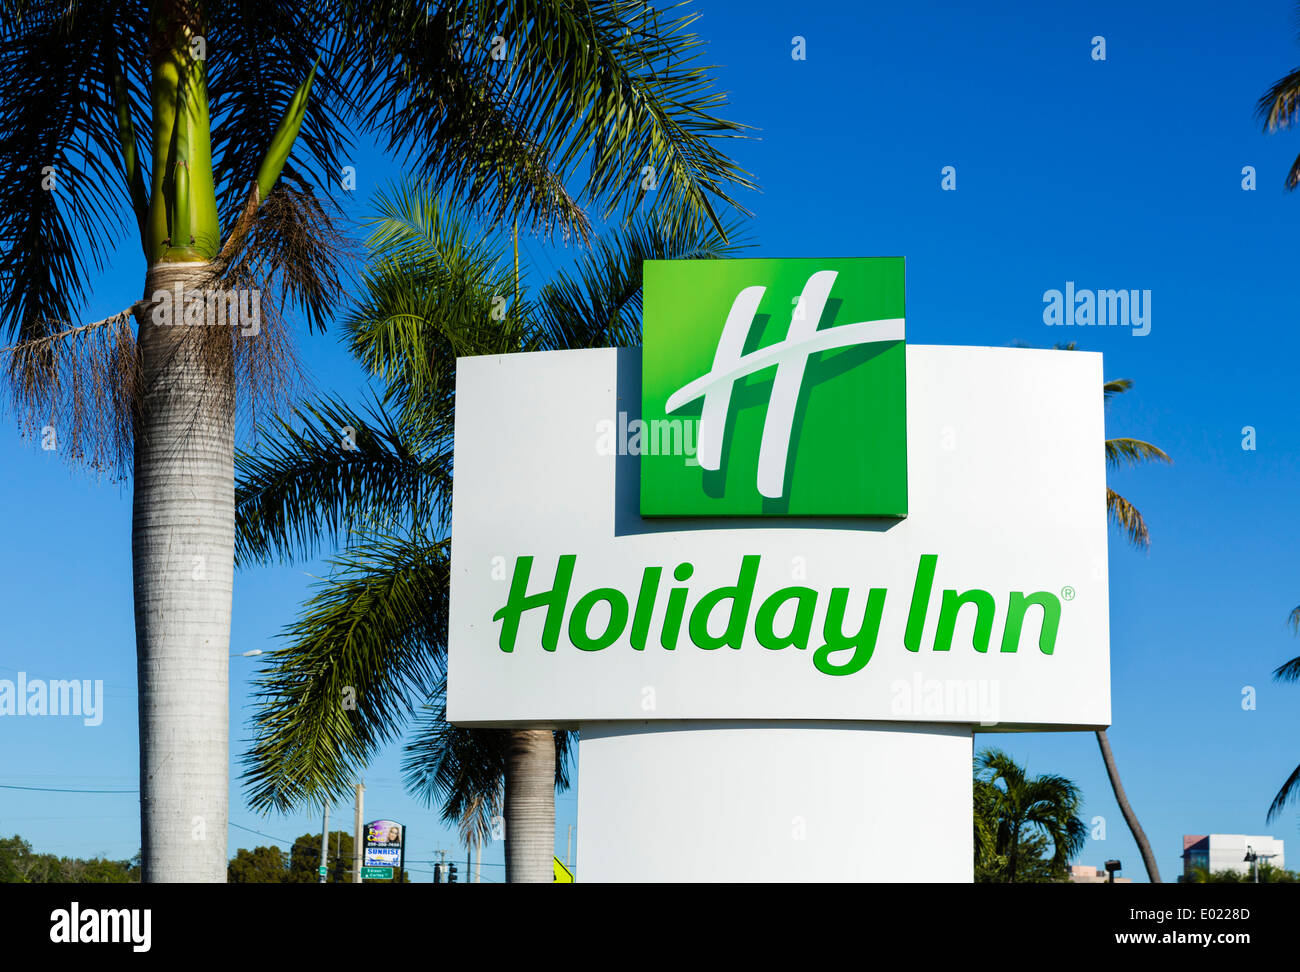 Holiday Inn hotel sign and palm trees, Florida, USA Stock Photo